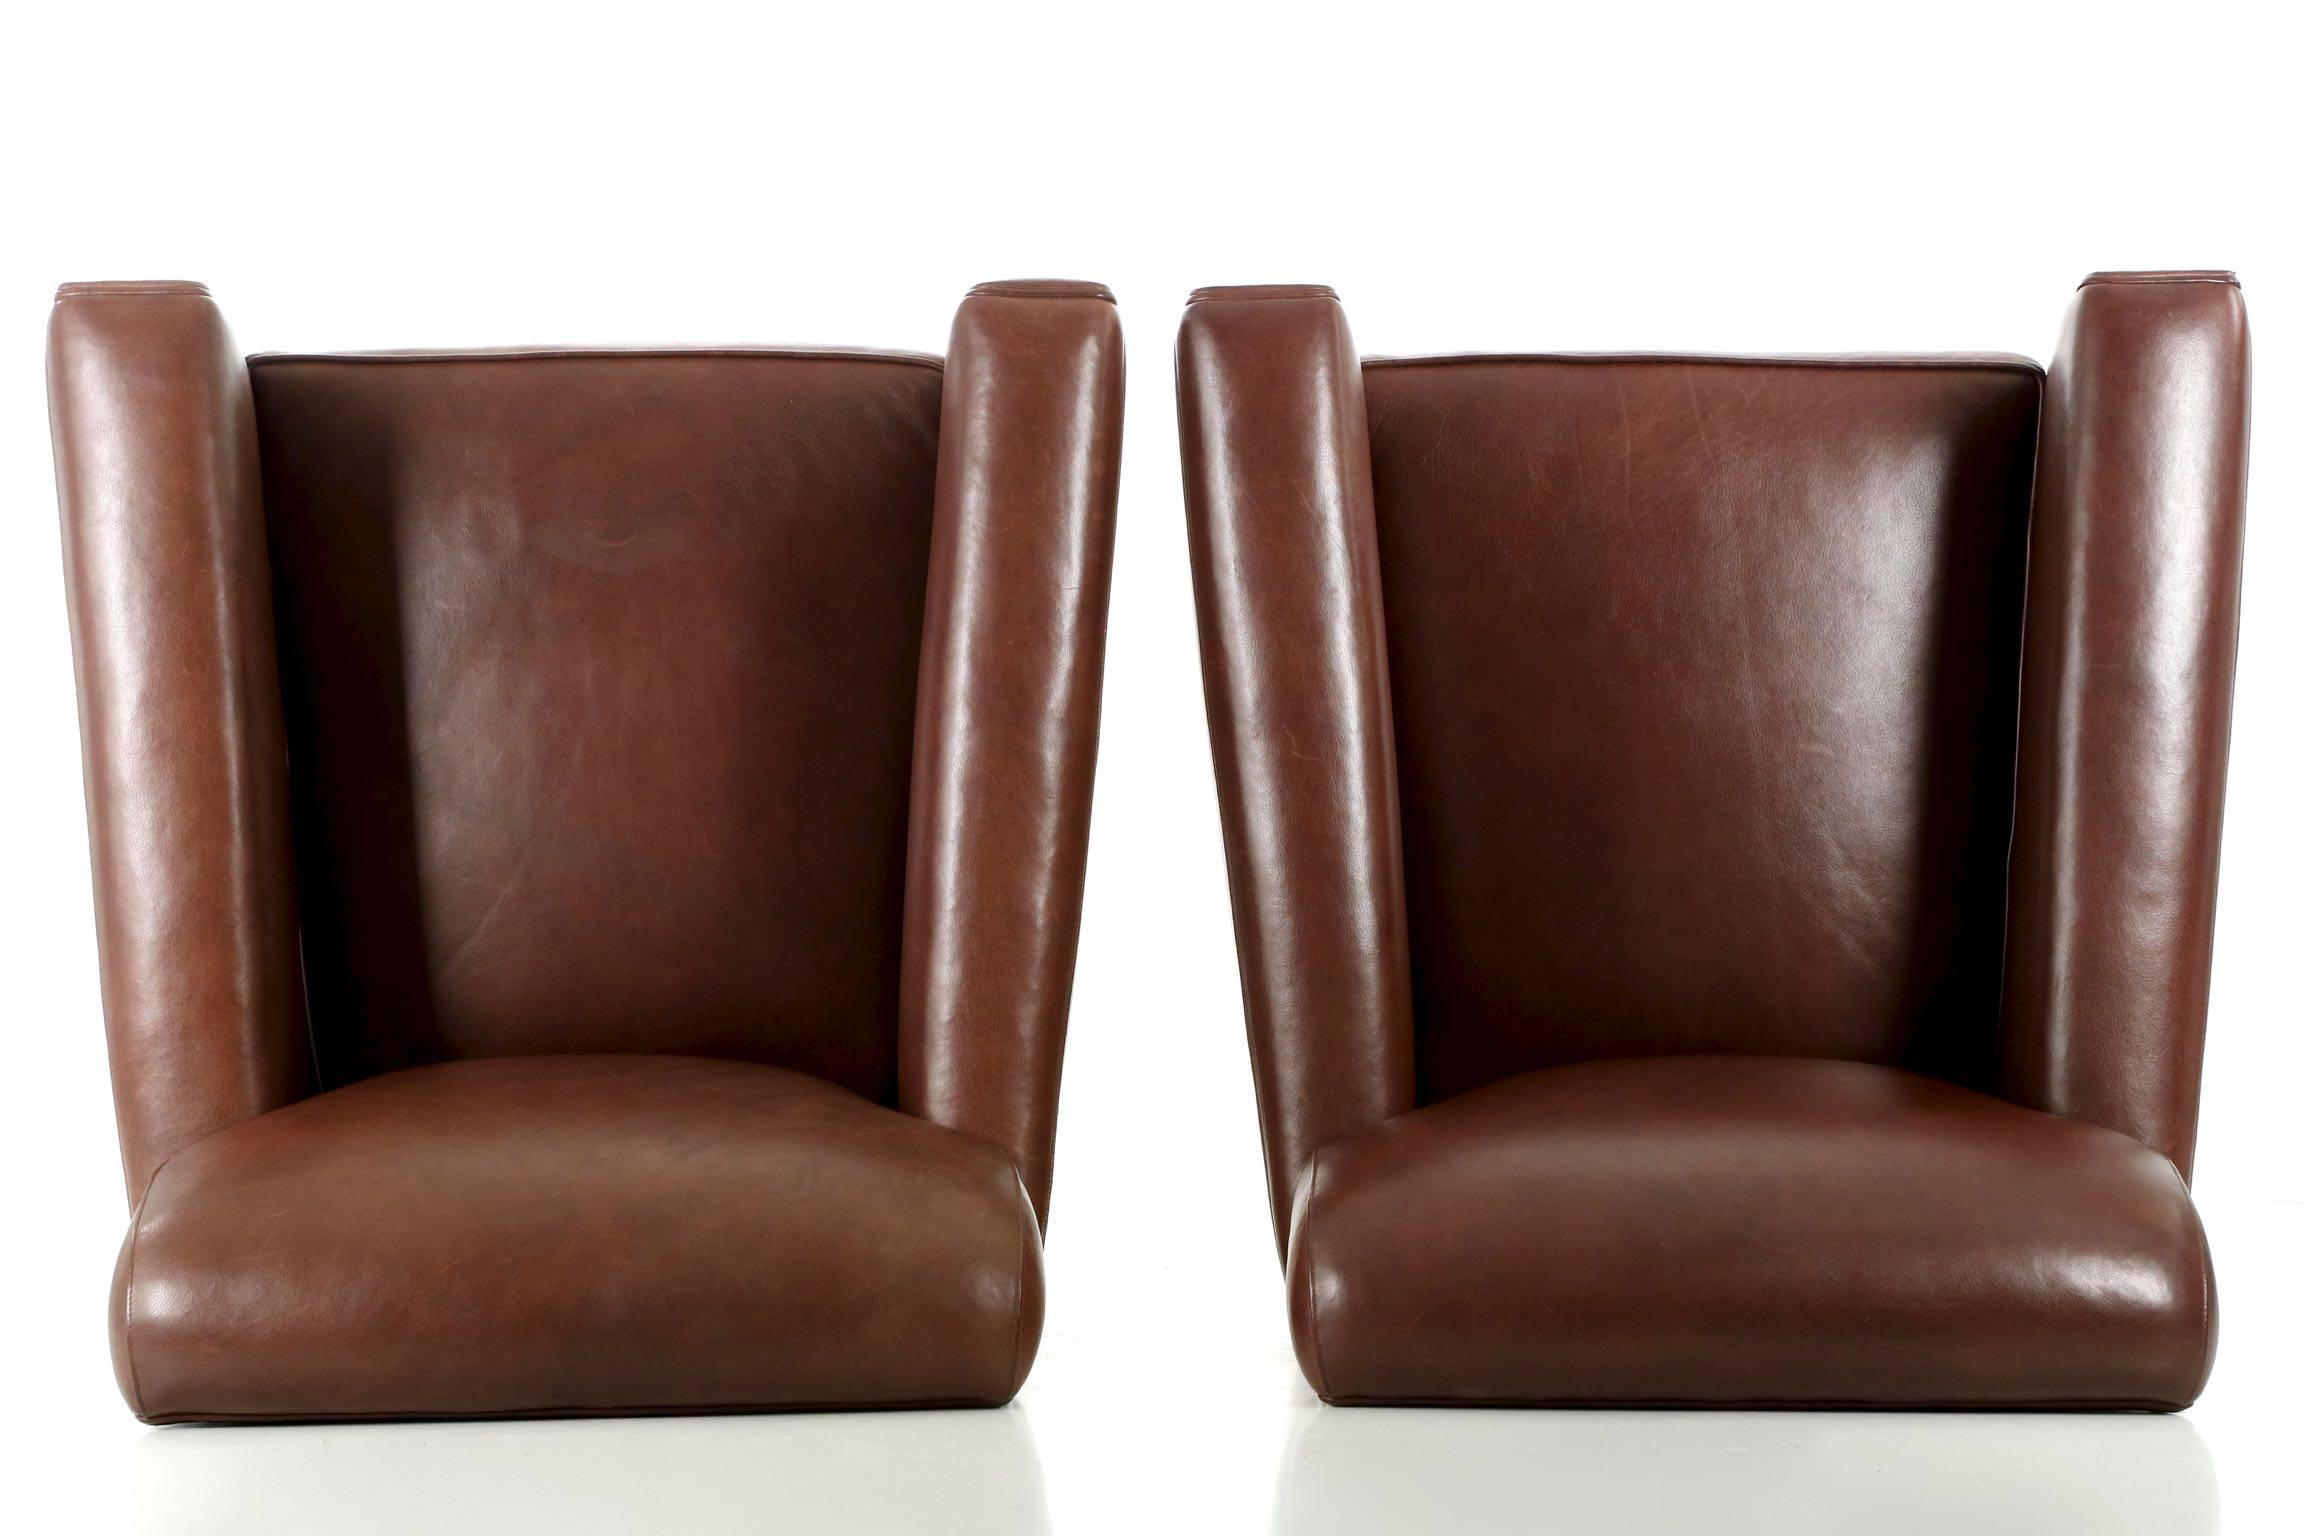 American Pair of Coach Inc. Brown Leather Club Chairs in the Art Deco Taste